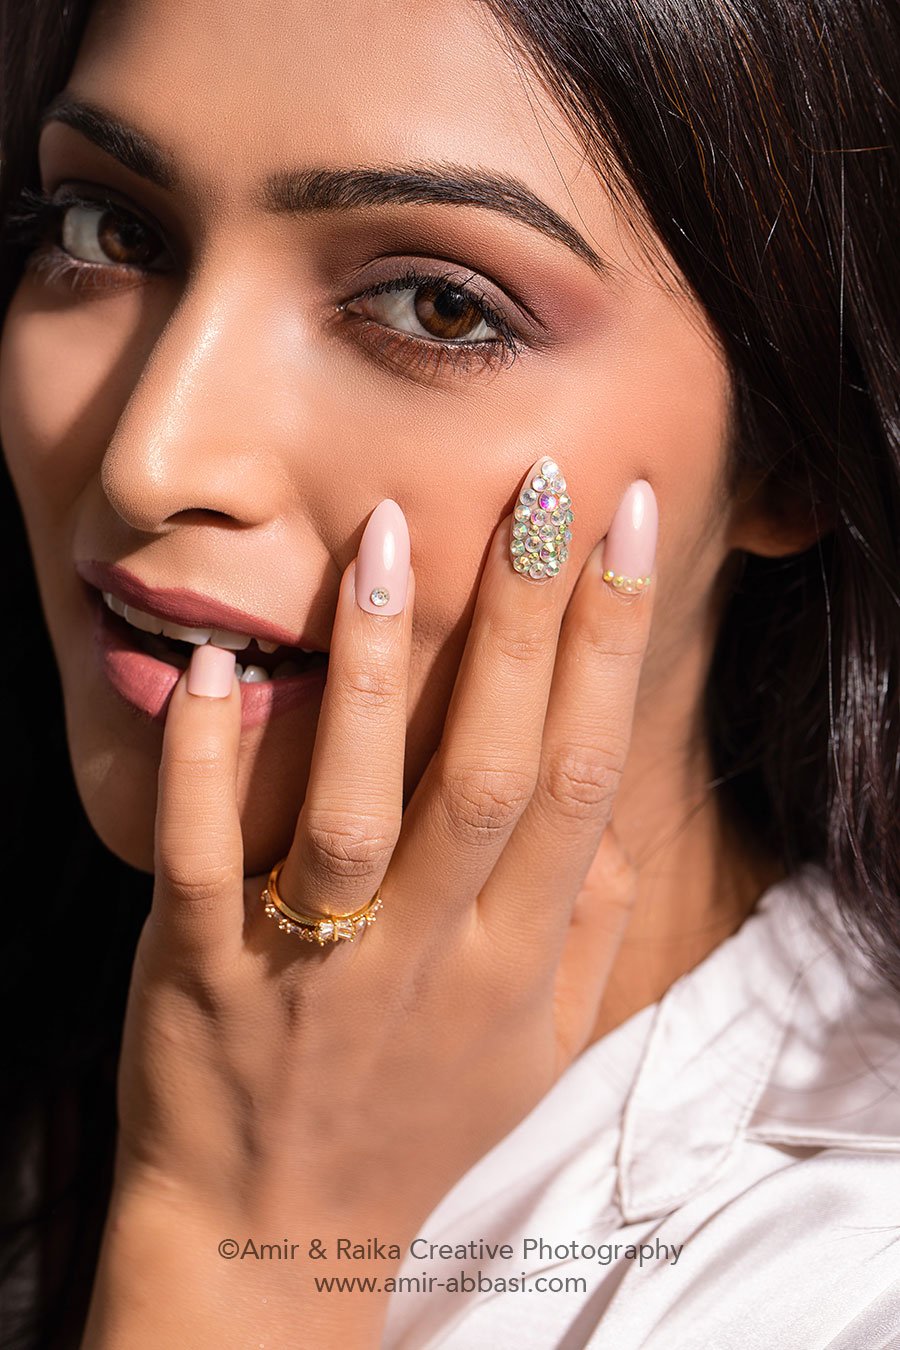 Stick-on nails photography on model in Mumbai